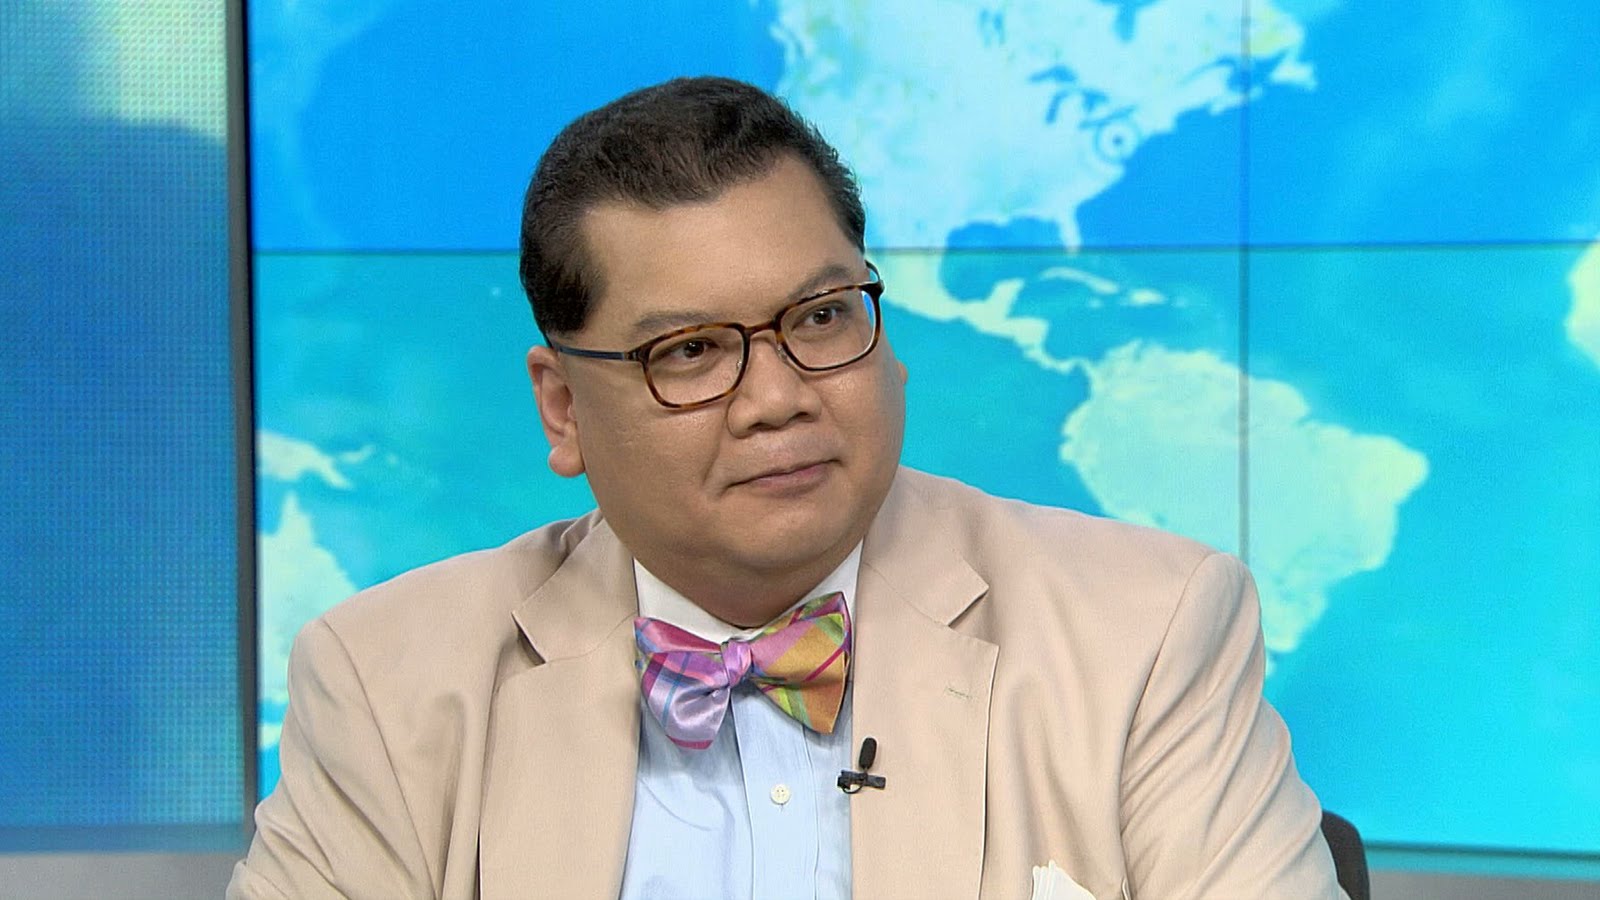 The 10 Minute Interview - Peter Pham, US Envoy to the Great Lakes Region of Africa